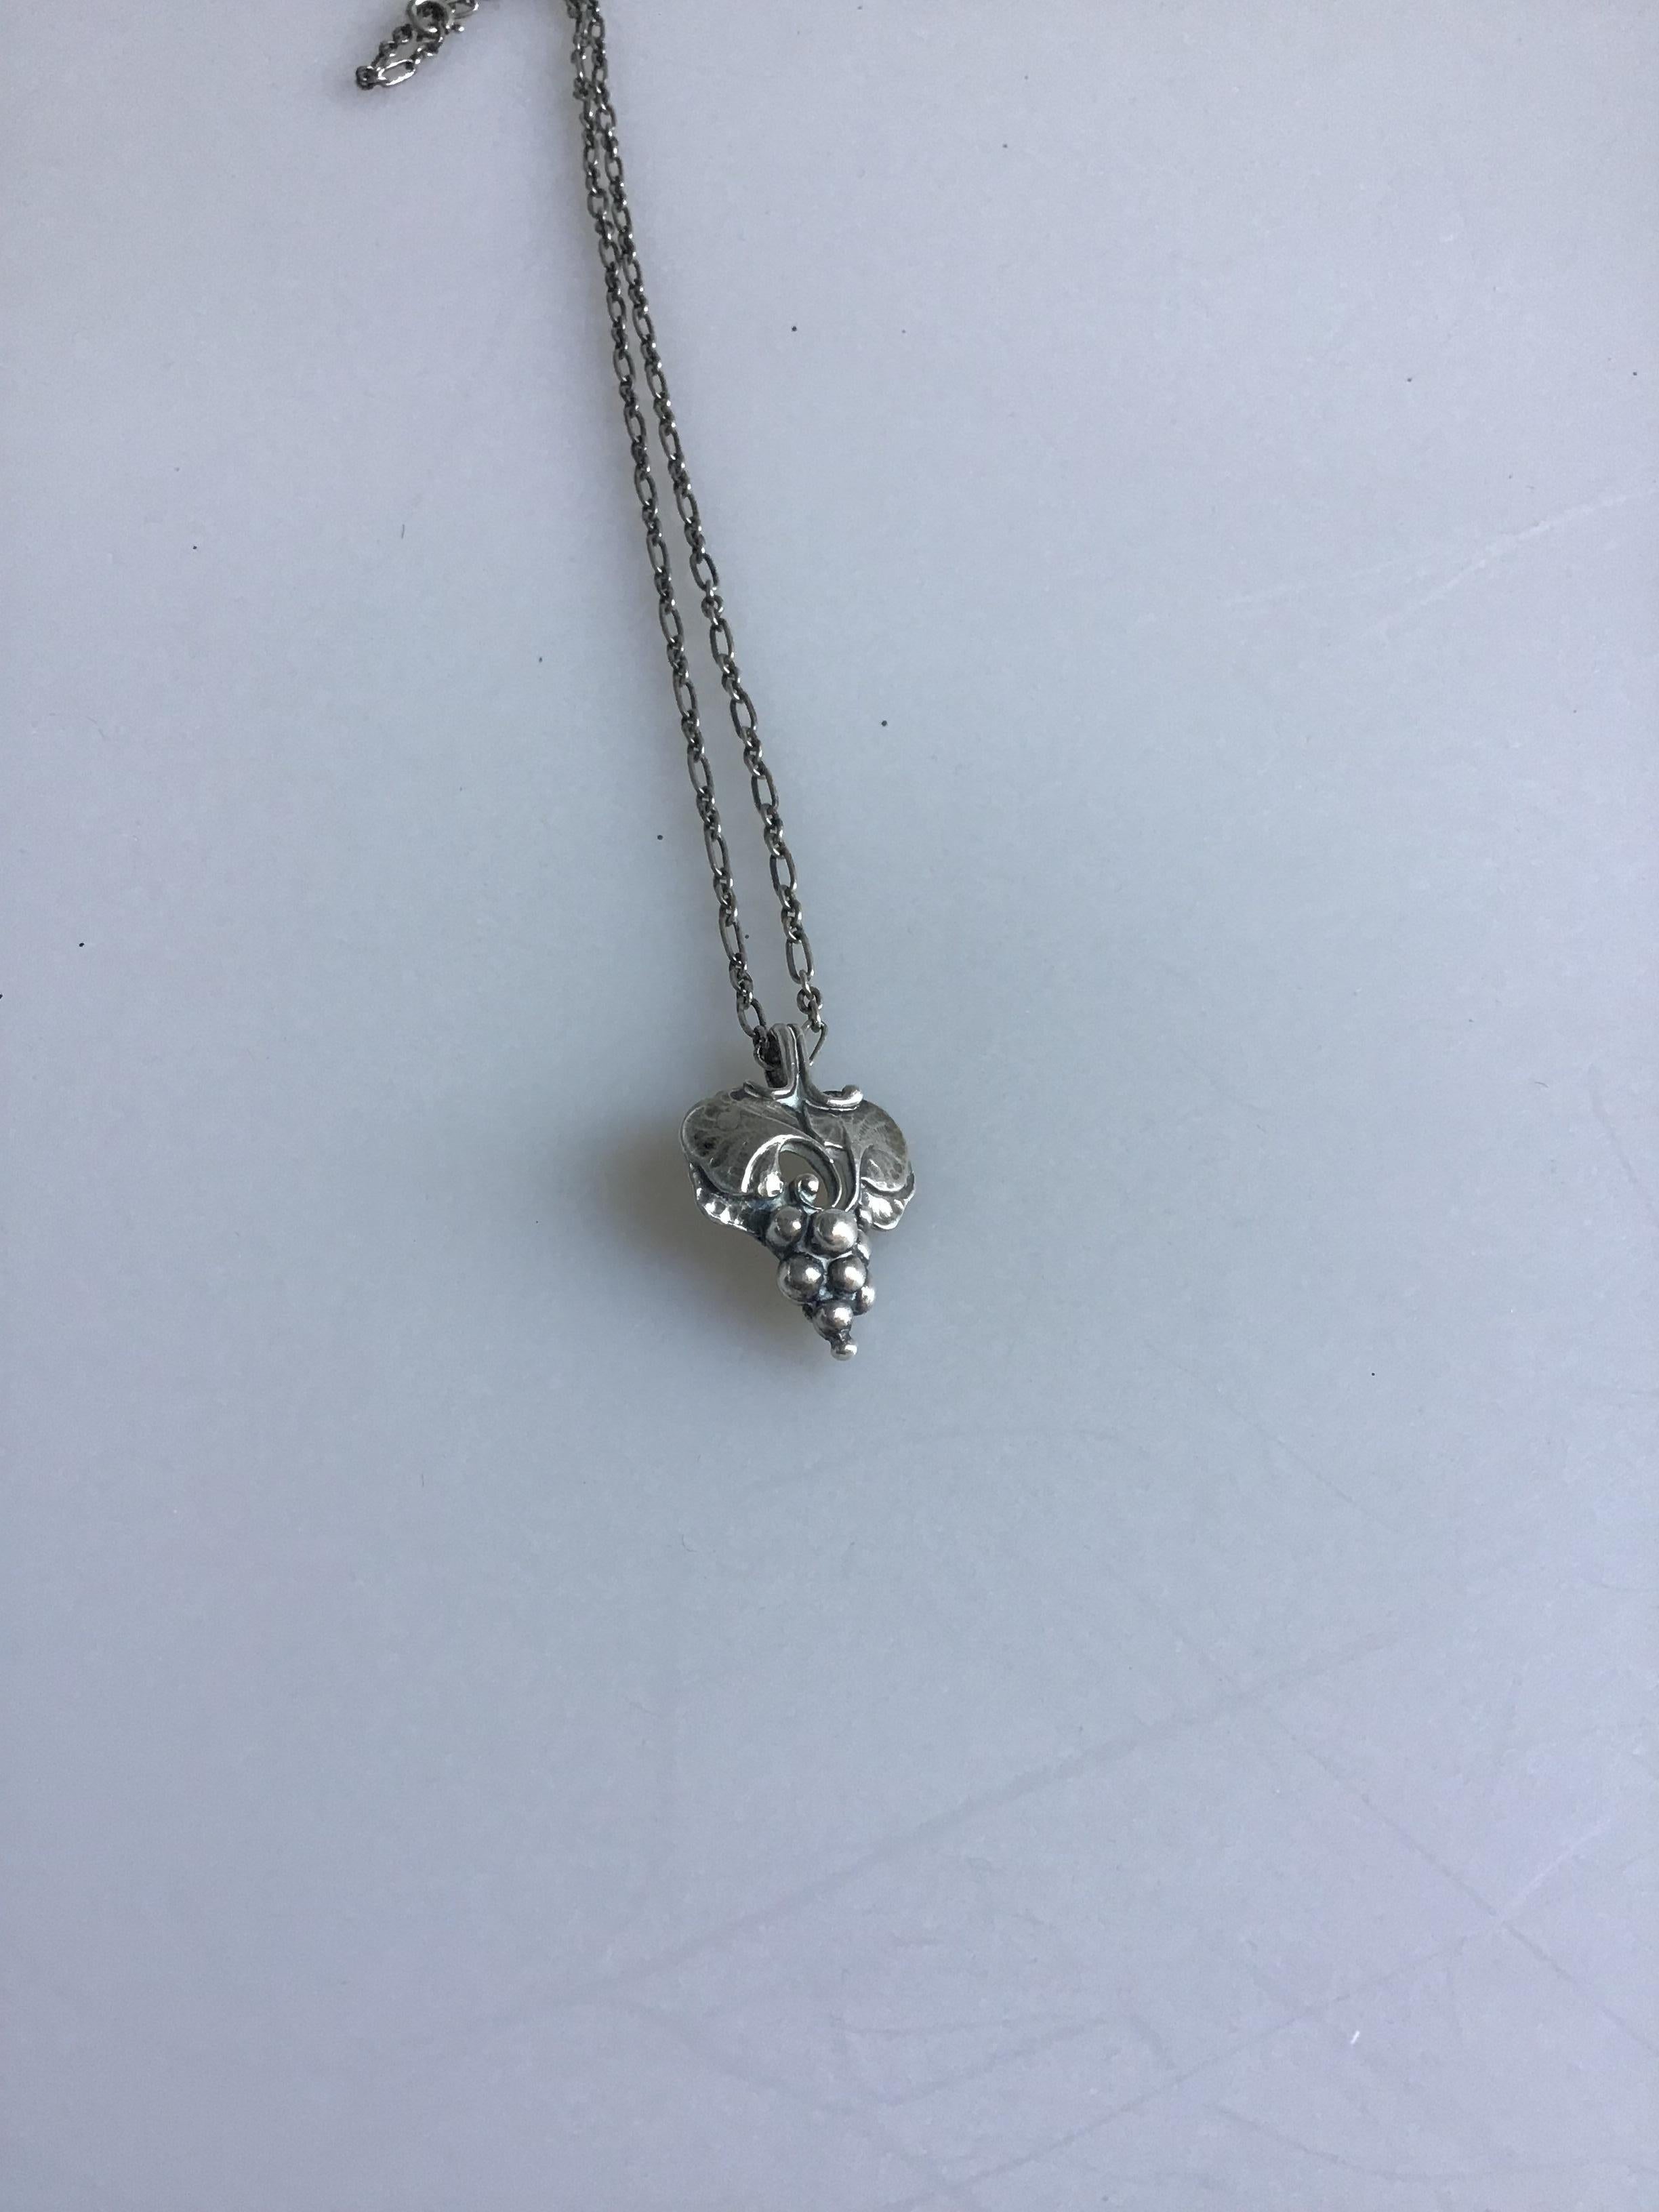 Georg Jensen Sterling Silver Annual Pendant from 1996. Weighs 10.1 g / 0.36 oz.